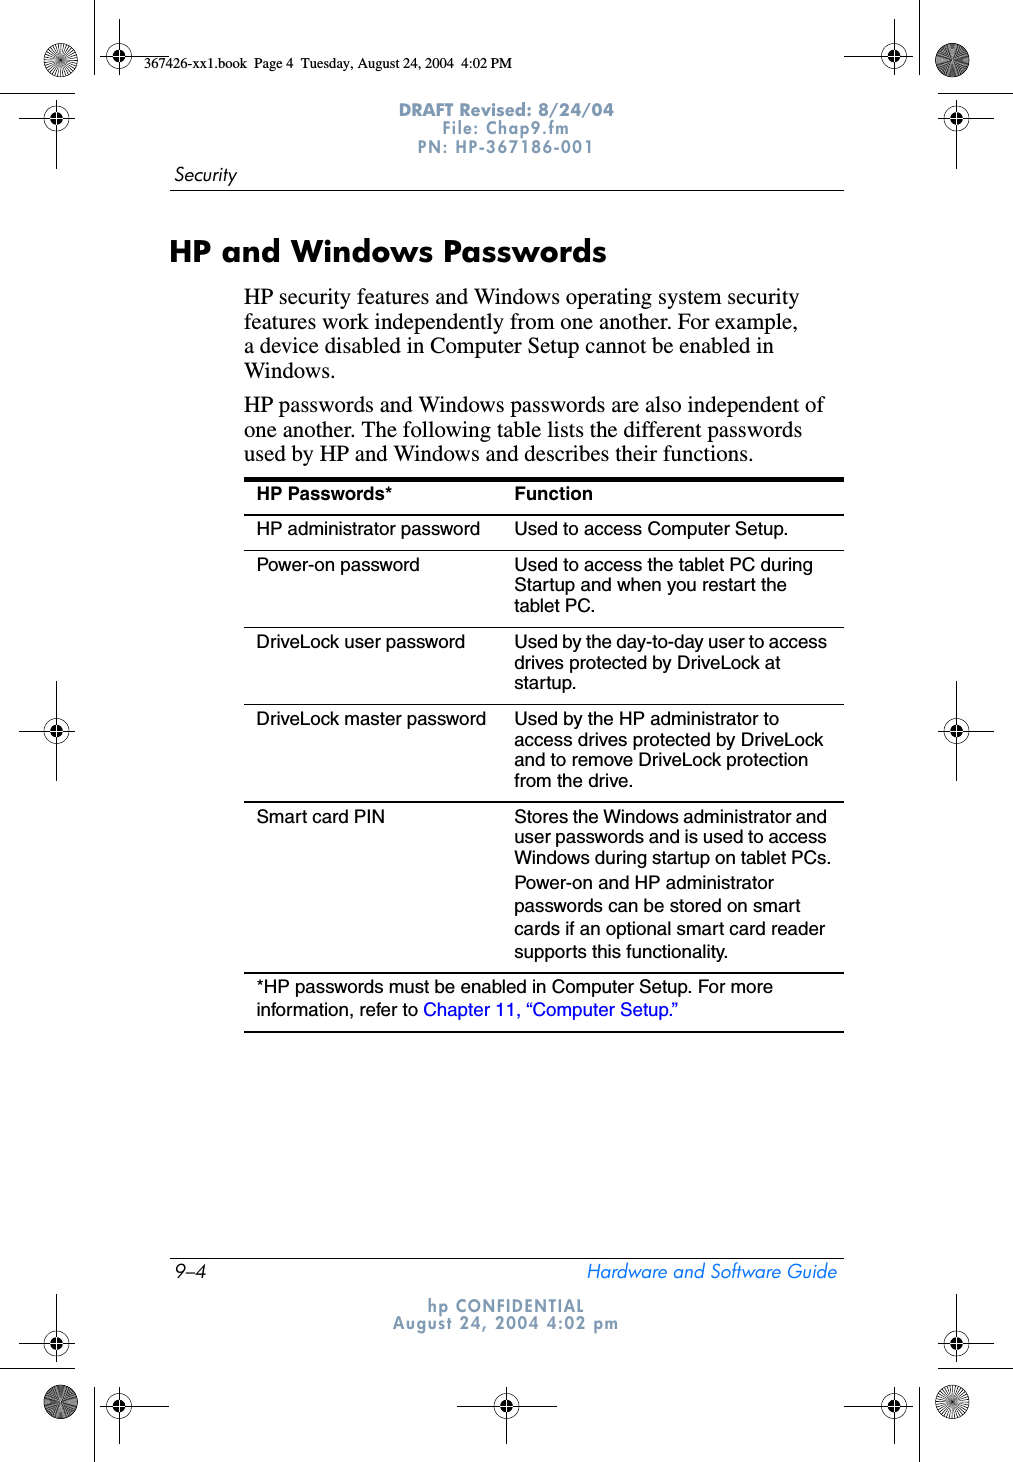 9–4 Hardware and Software GuideSecurityDRAFT Revised: 8/24/04File: Chap9.fm PN: HP-367186-001 hp CONFIDENTIALAugust 24, 2004 4:02 pmHP and Windows PasswordsHP security features and Windows operating system security features work independently from one another. For example, a device disabled in Computer Setup cannot be enabled in Windows.HP passwords and Windows passwords are also independent of one another. The following table lists the different passwords used by HP and Windows and describes their functions.HP Passwords* FunctionHP administrator password Used to access Computer Setup.Power-on password Used to access the tablet PC during Startup and when you restart the tablet PC.DriveLock user password Used by the day-to-day user to access drives protected by DriveLock at startup.DriveLock master password Used by the HP administrator to access drives protected by DriveLock and to remove DriveLock protection from the drive.Smart card PIN Stores the Windows administrator and user passwords and is used to access Windows during startup on tablet PCs.Power-on and HP administrator passwords can be stored on smart cards if an optional smart card reader supports this functionality.*HP passwords must be enabled in Computer Setup. For more information, refer to Chapter 11, “Computer Setup.”367426-xx1.book  Page 4  Tuesday, August 24, 2004  4:02 PM